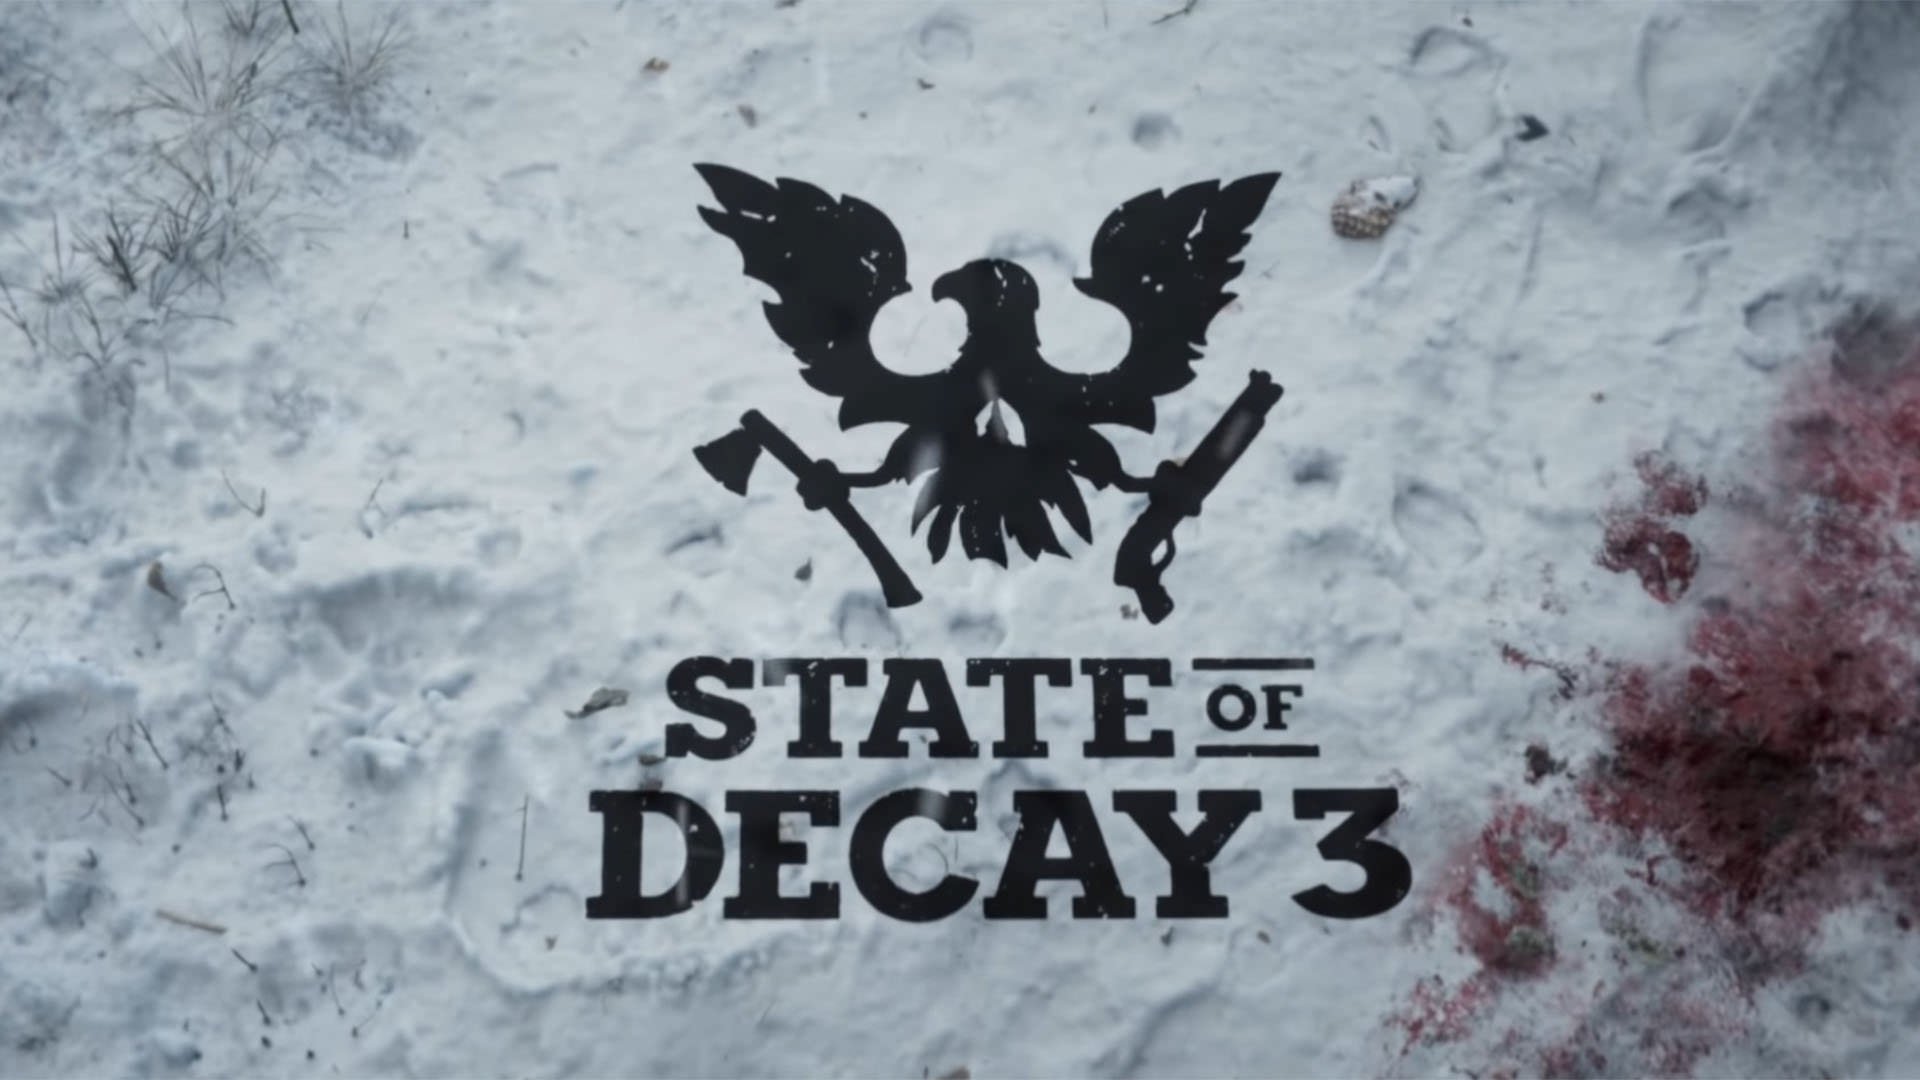 State of Decay 3 game logo